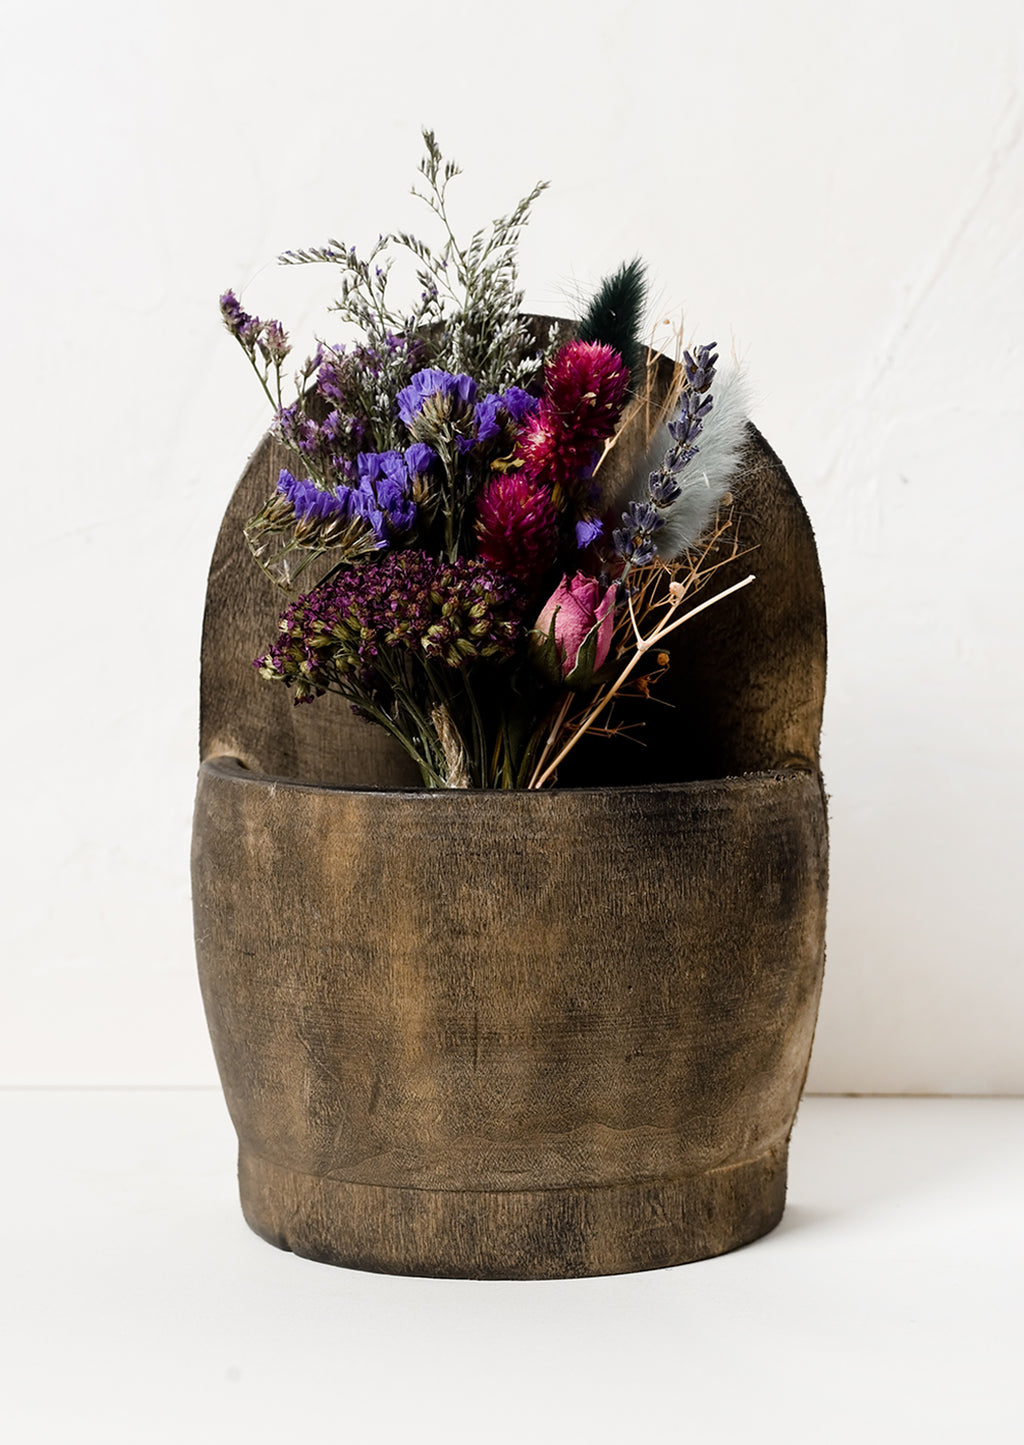 2: A wooden wall basket housing dried flowers.